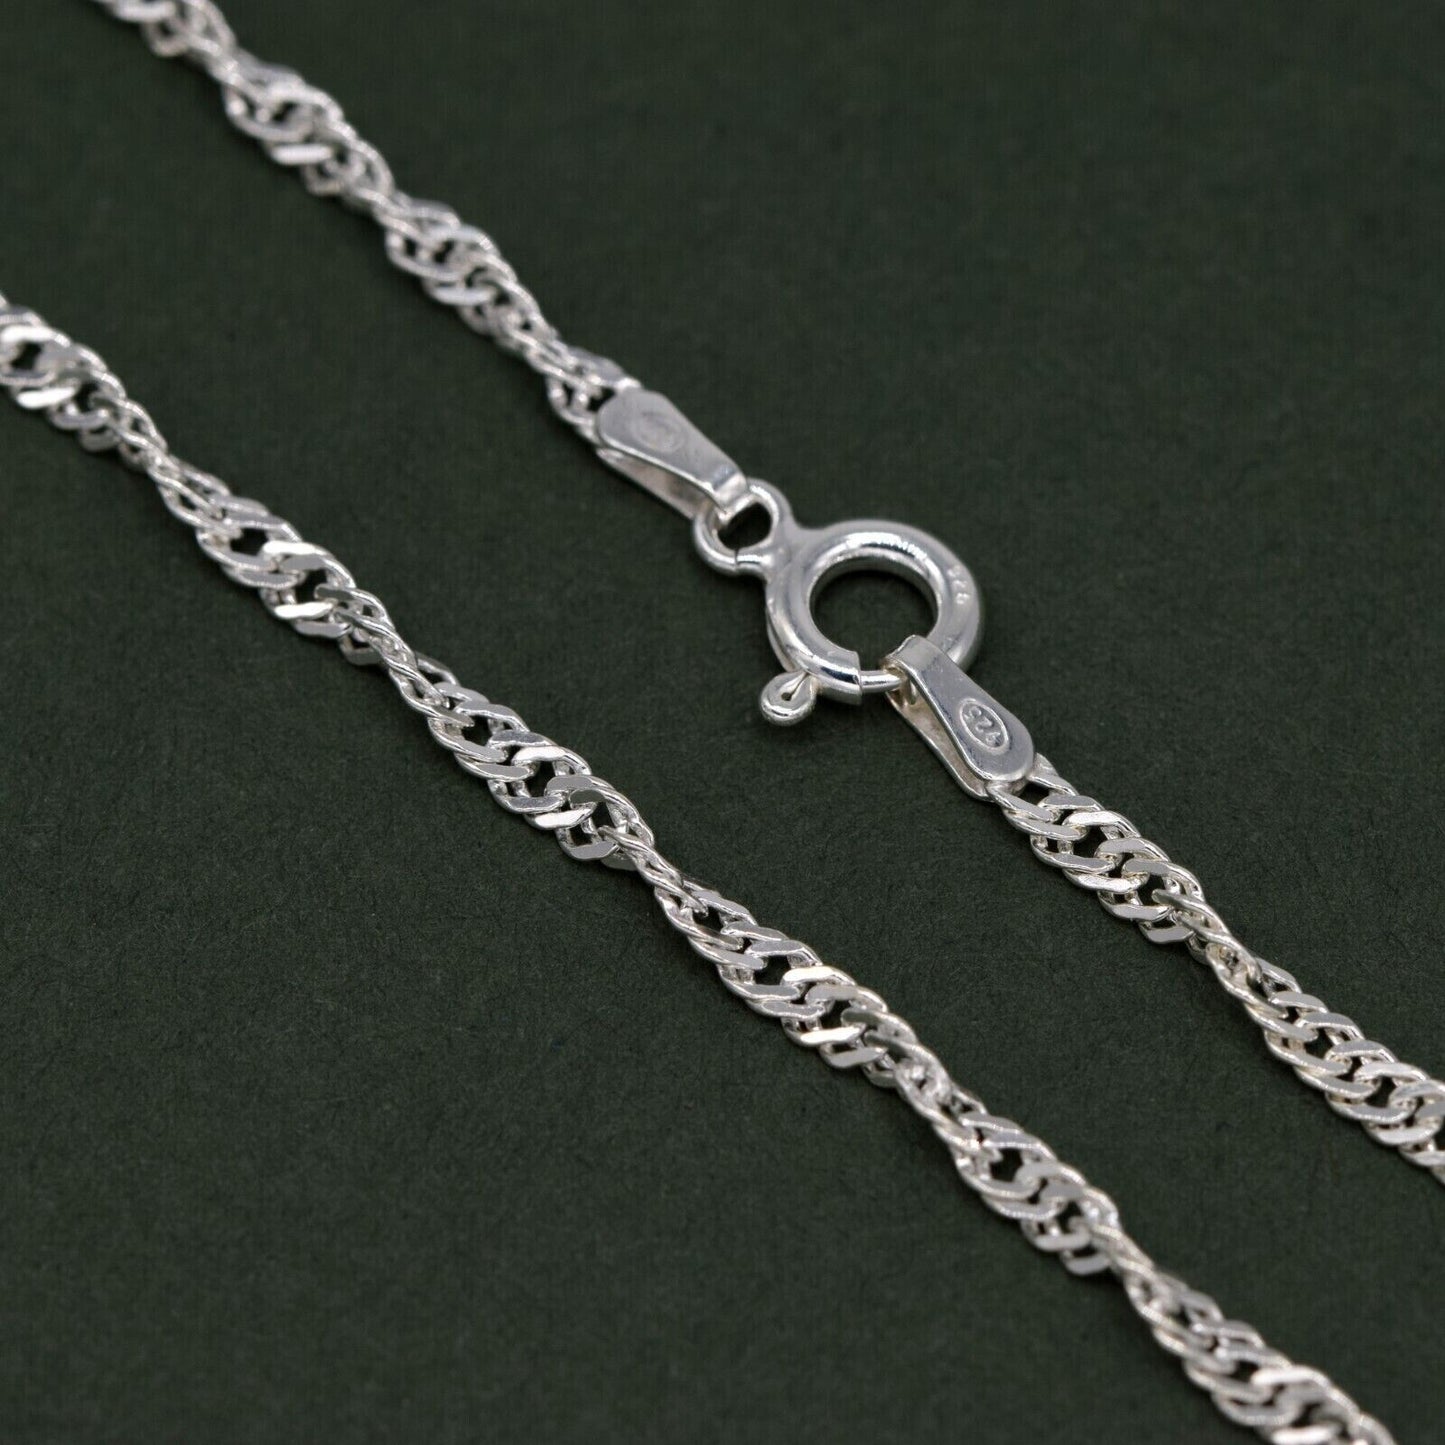 Genuine 925 Sterling Silver 10" Singapore Chain Anklet W/ Floating Heart Pendant